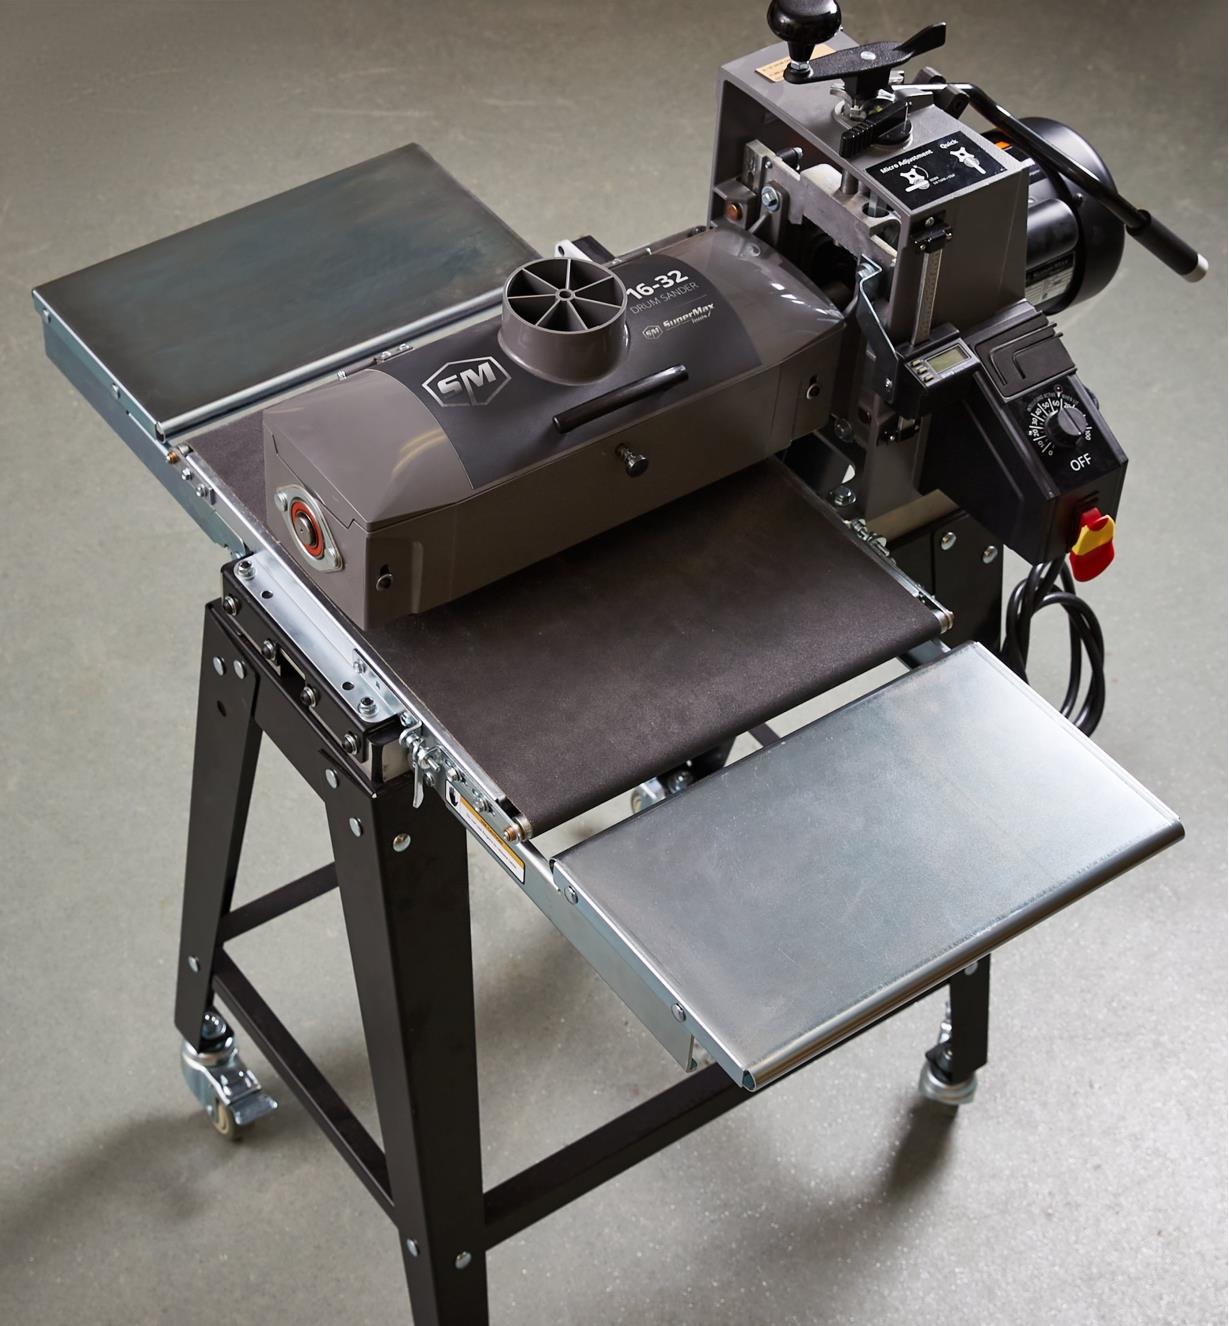 Infeed/outfeed tables attached to either side of a drum sander with a stand